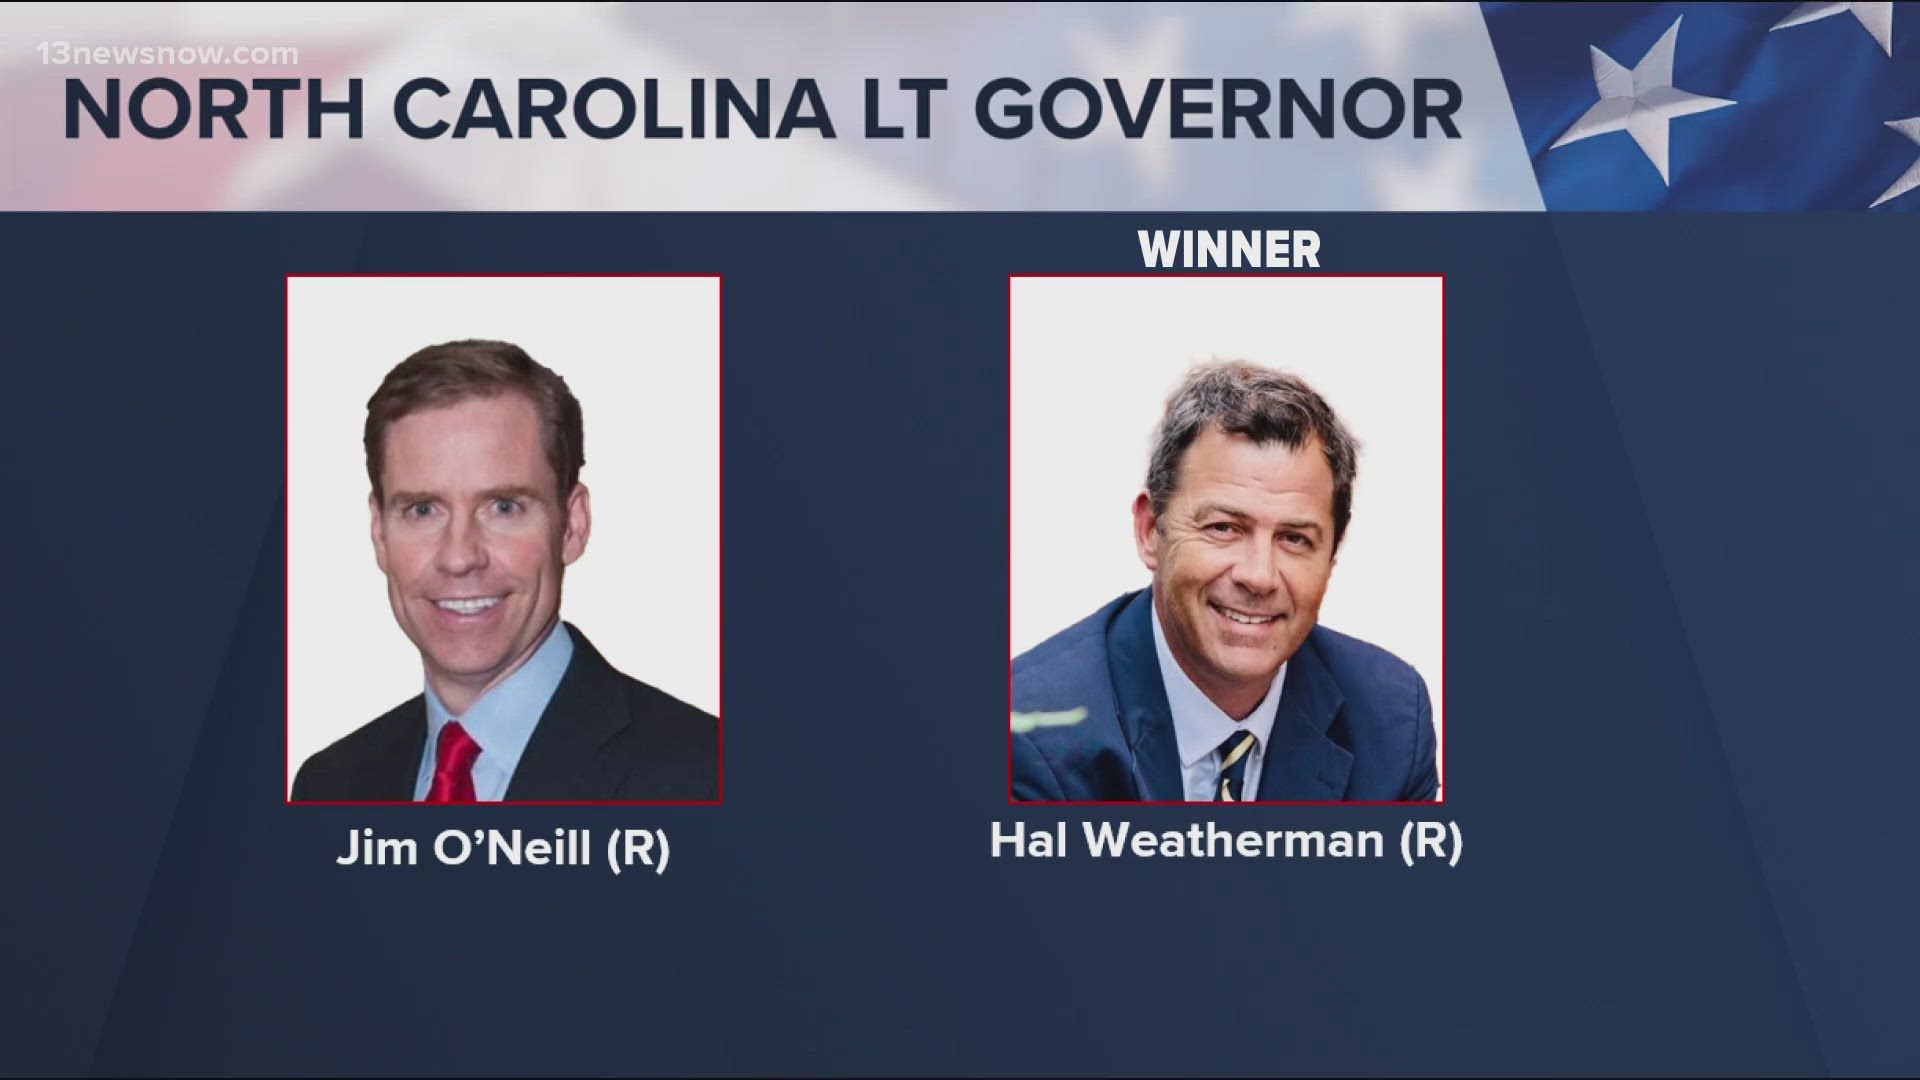 Two months after Super Tuesday two races in North Carolina are finally being decided in a runoff election.